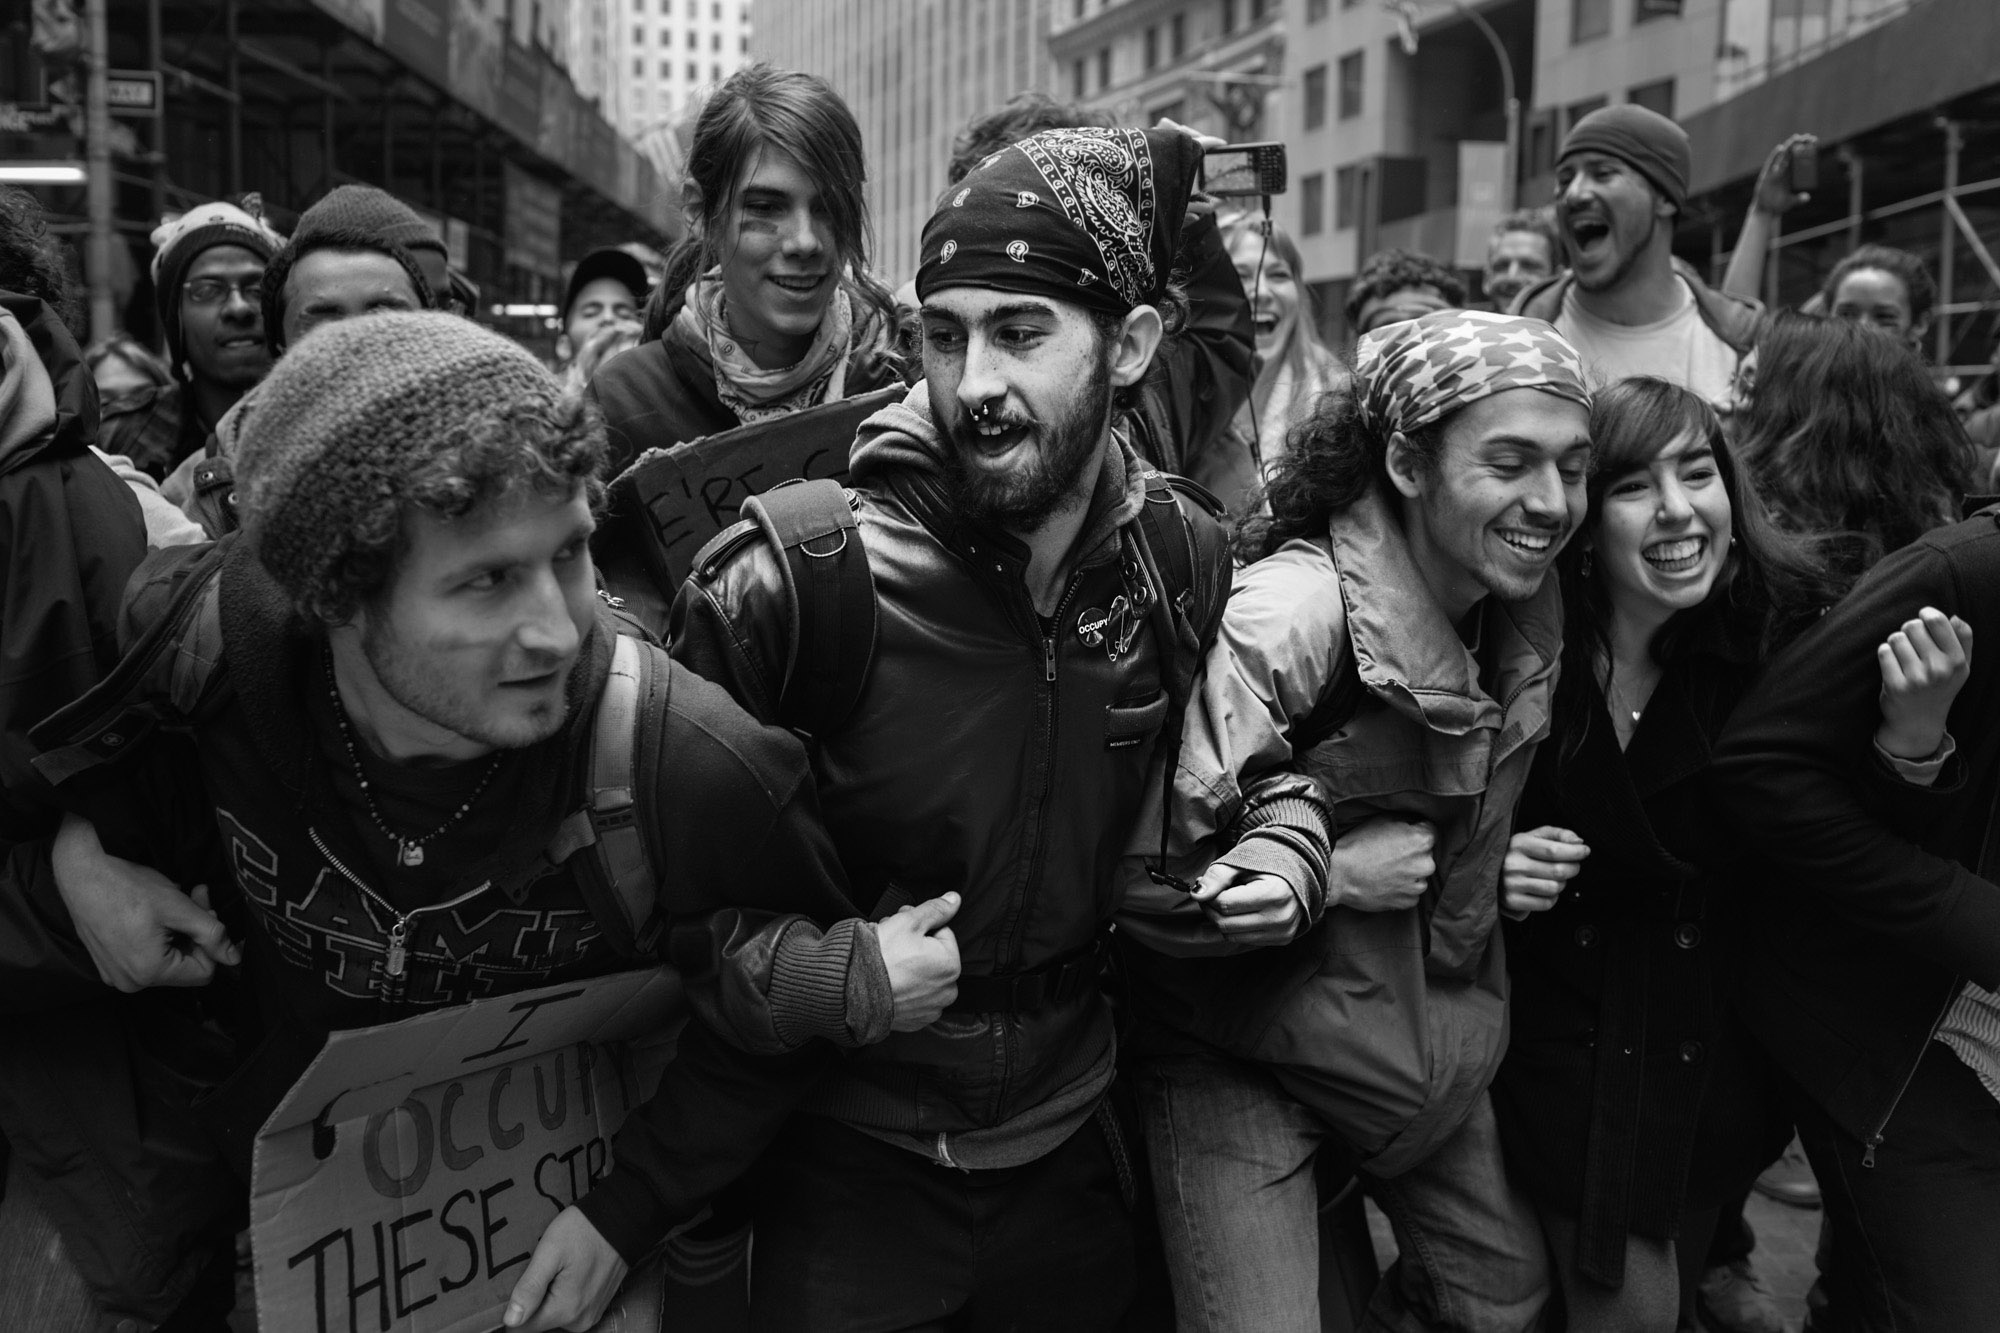  OWS protestors link arms to avoid people being singled out and arrested during a demonstration in New York City, March 2012. 